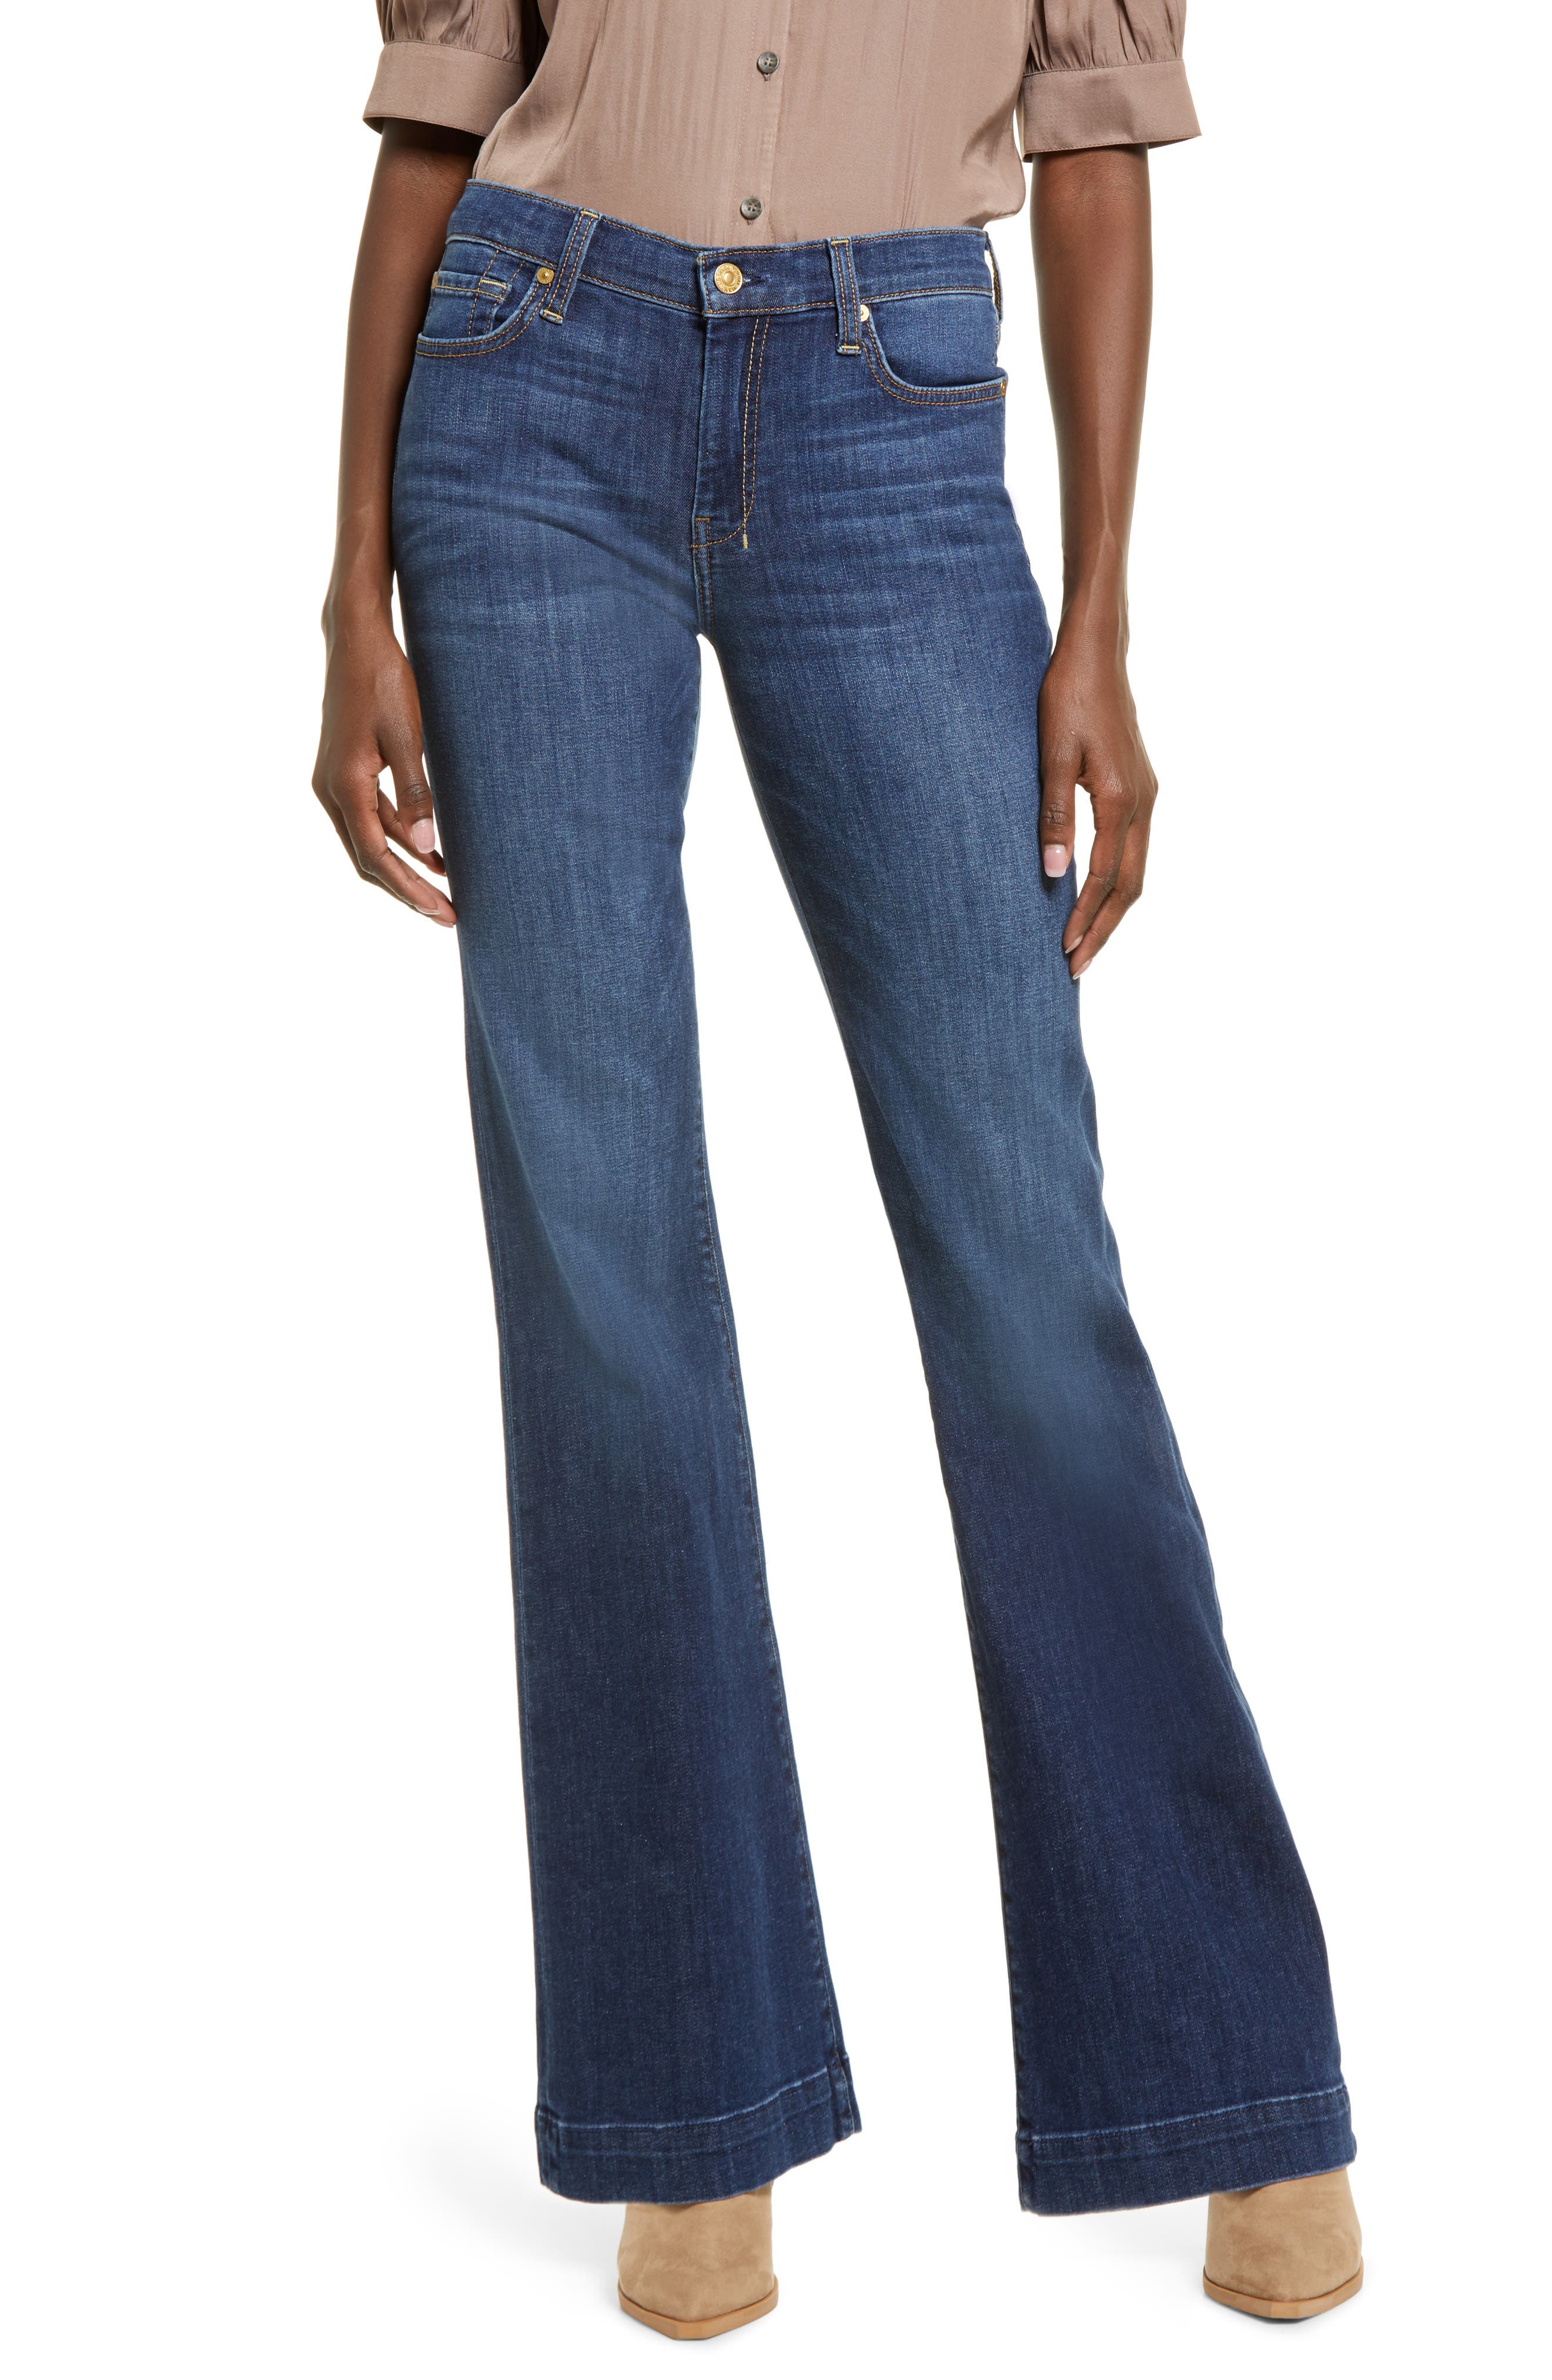 7 For All Mankind Women's Flared Denim Jeans With Leather Pocket Embroidery 